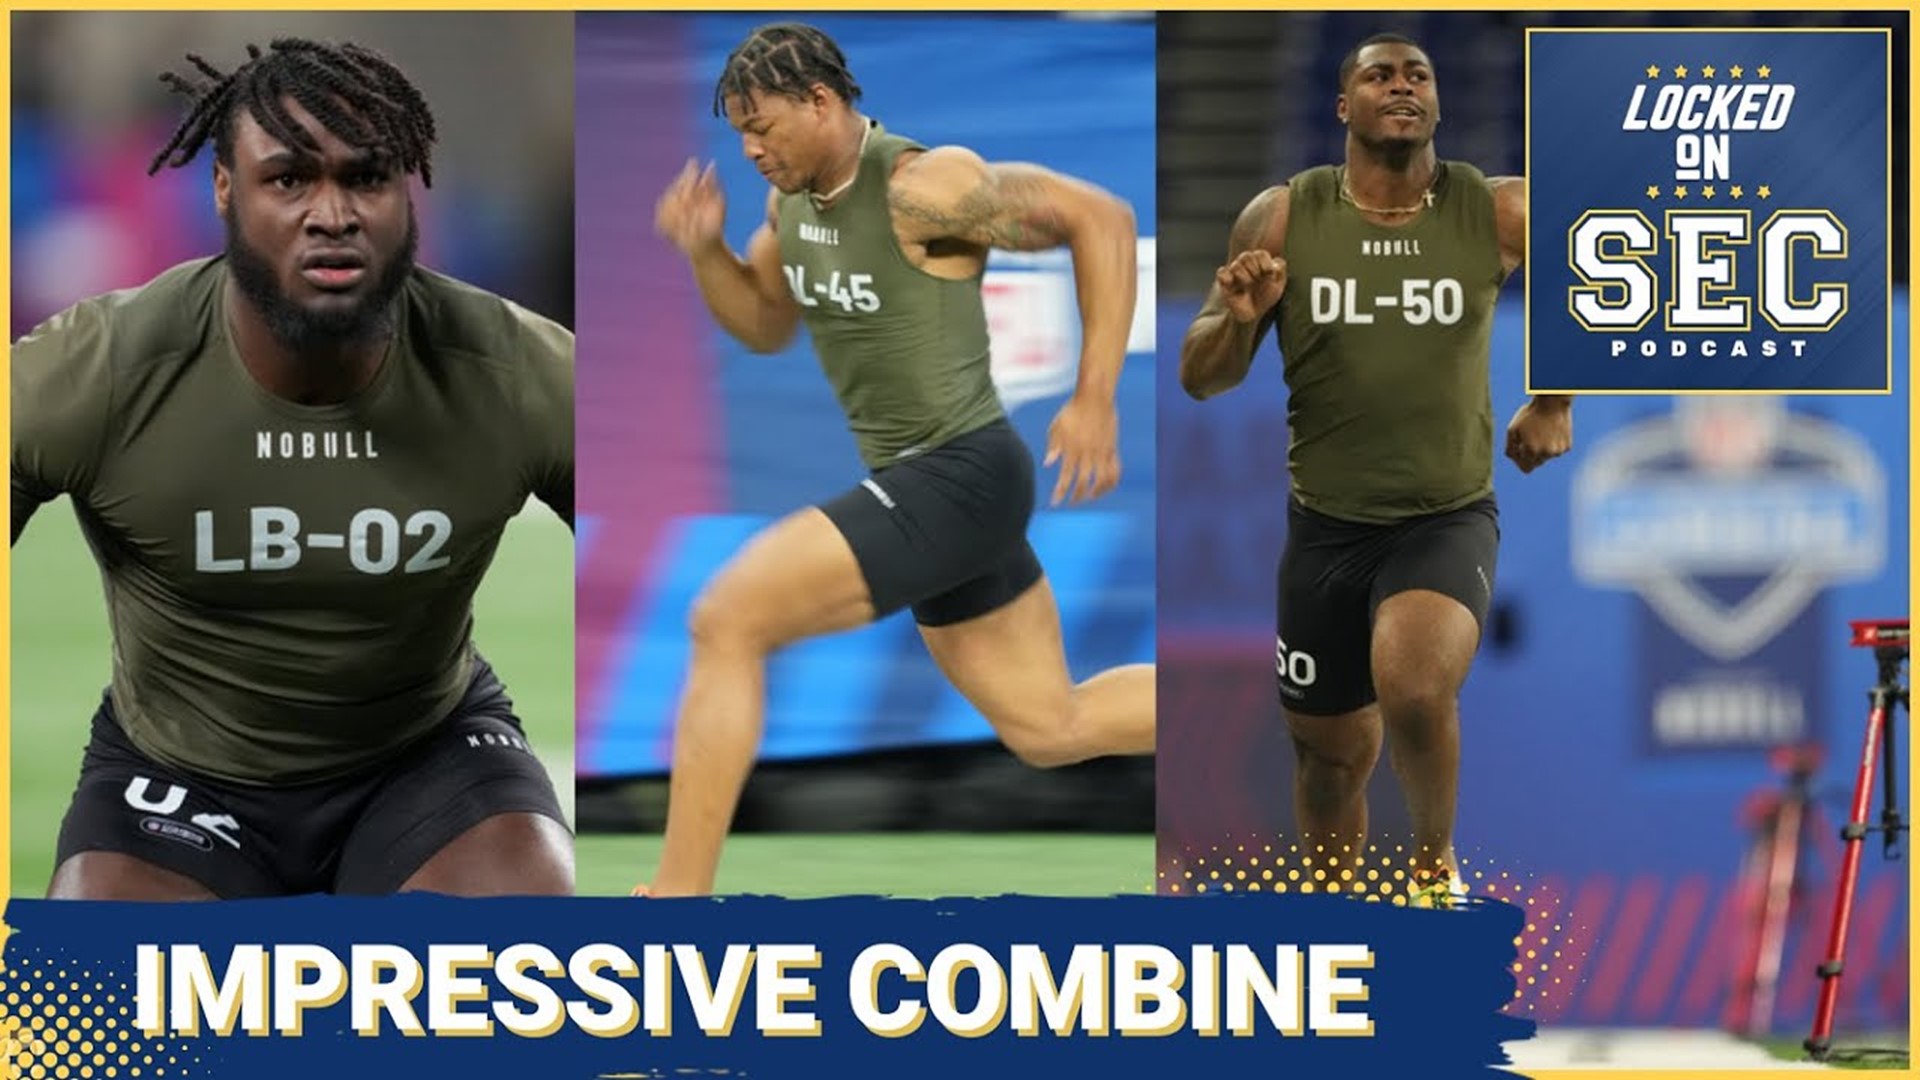 On today's show, we discuss some of the SEC guys who impressed at the NFL Combine on Thursday including Alabama's Will Anderson and Georgia's Nolan Smith.